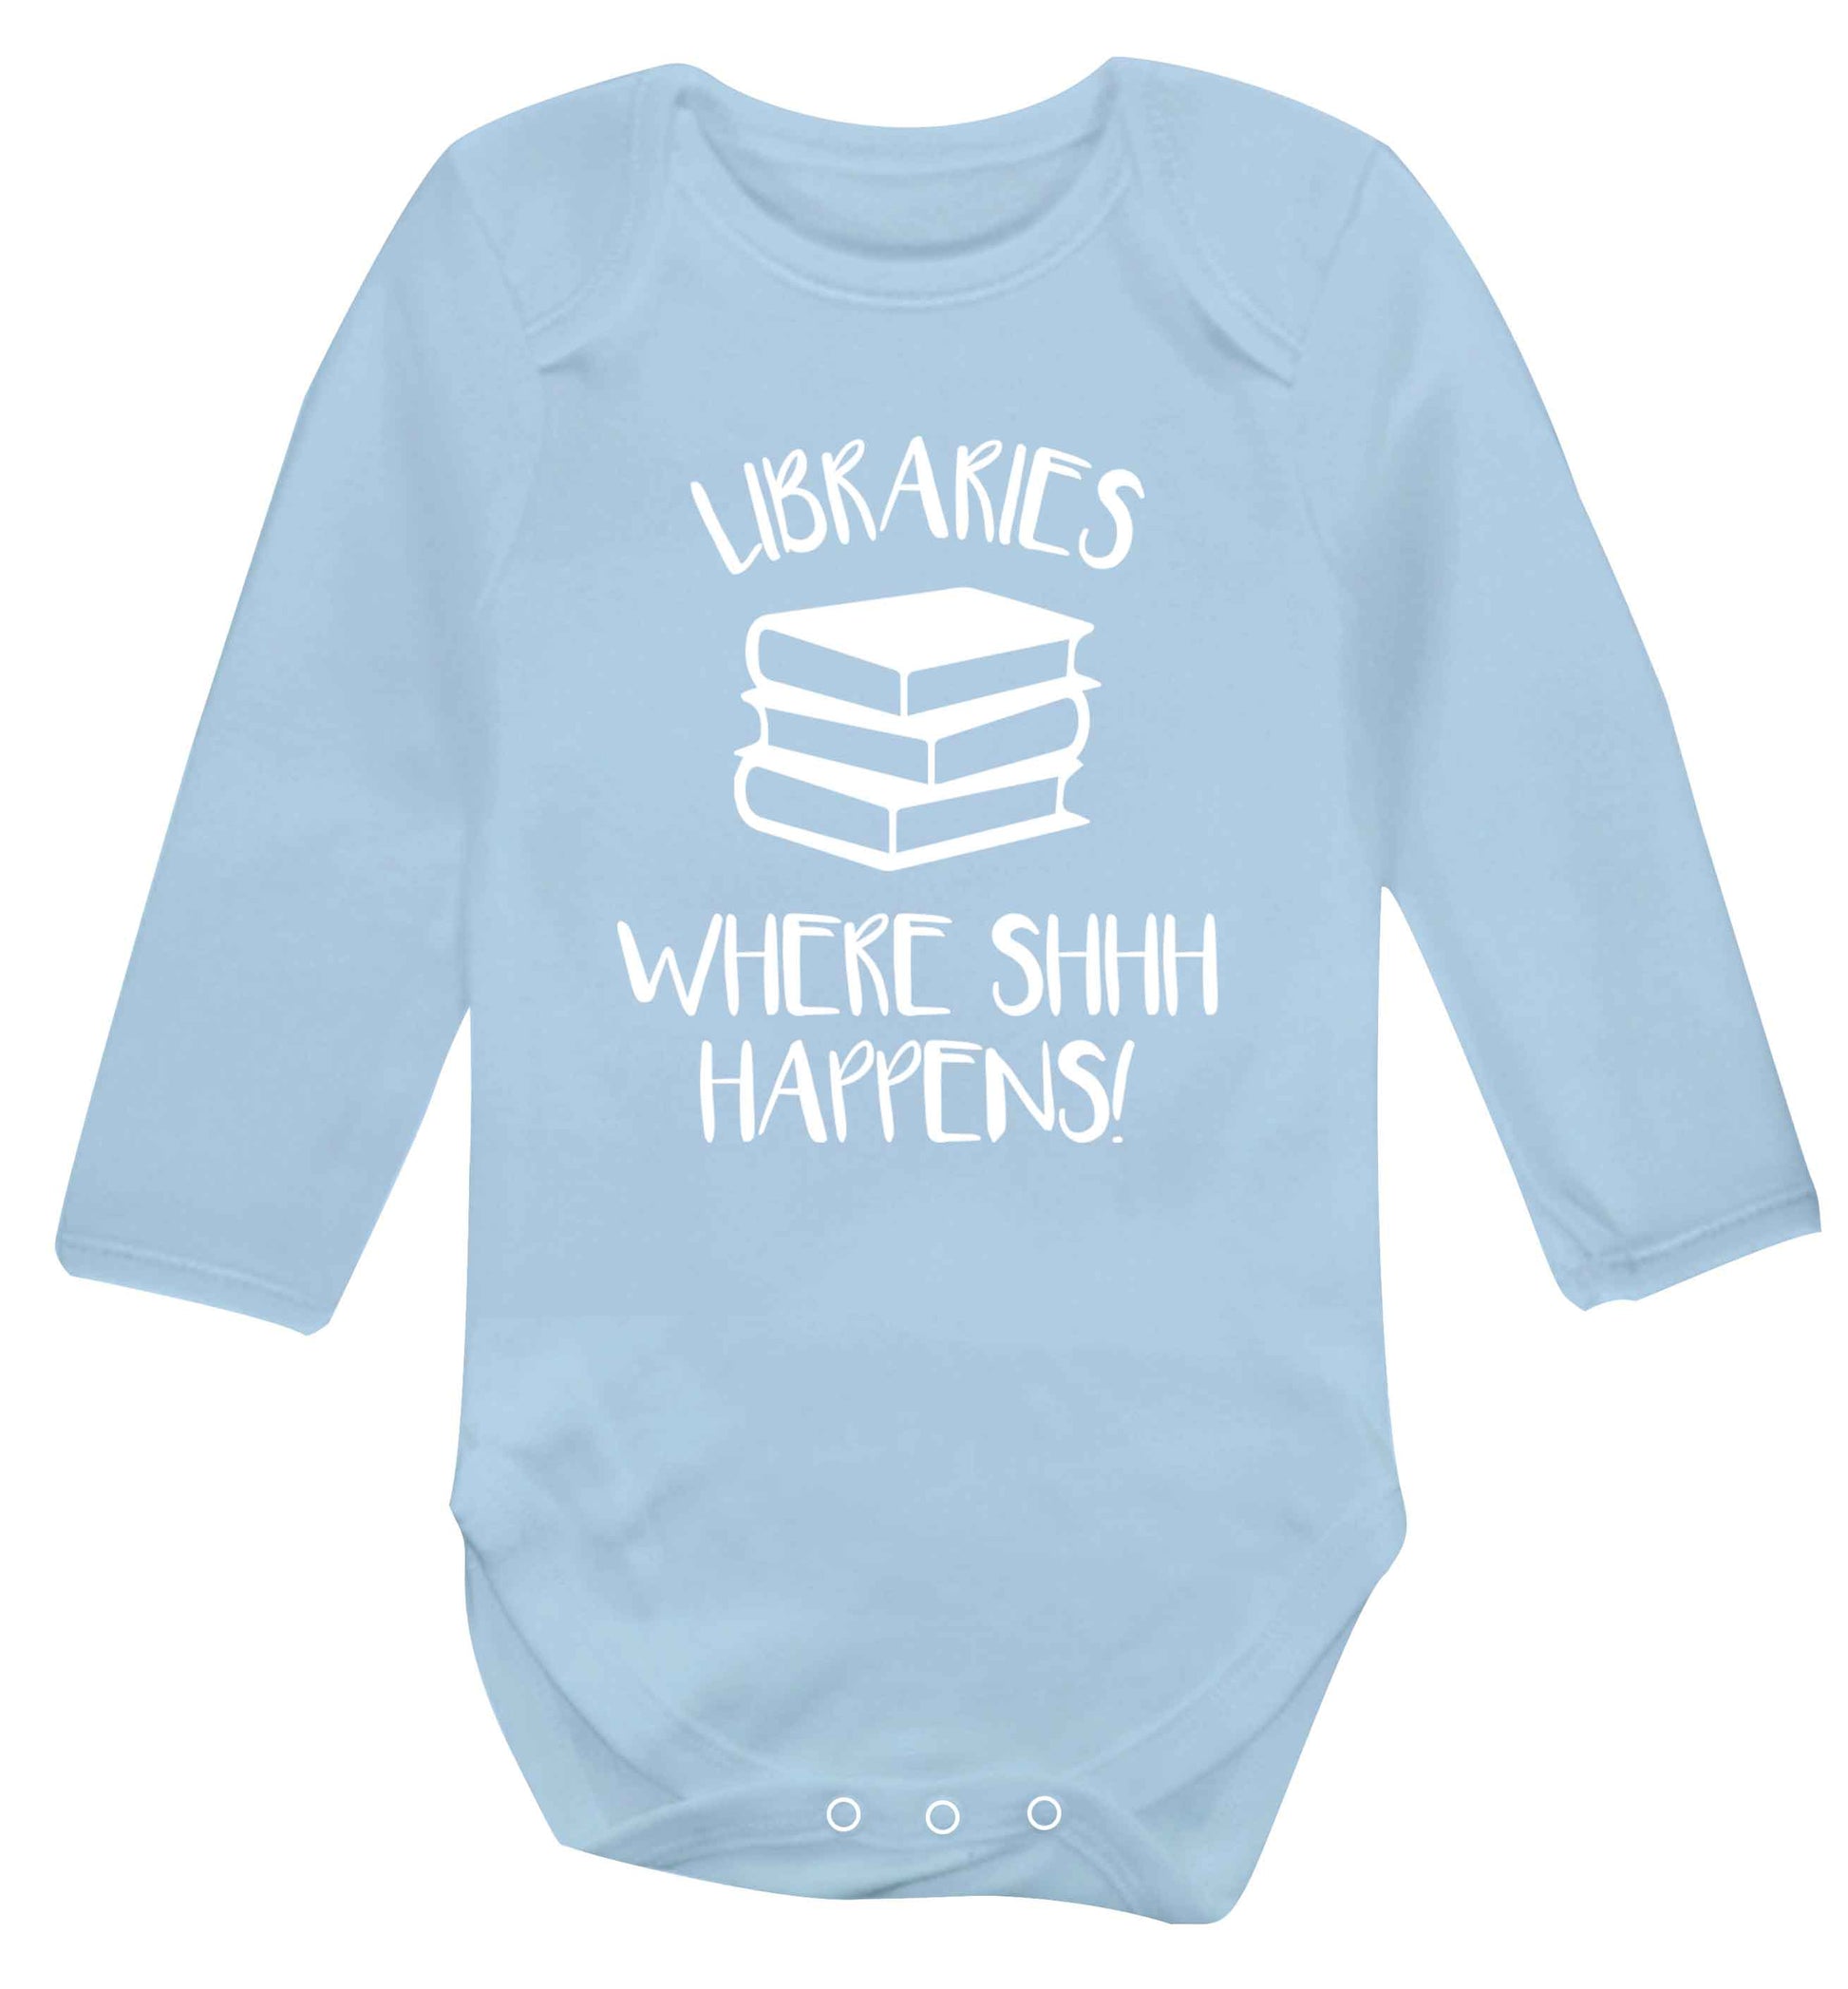 Libraries where shh happens! Baby Vest long sleeved pale blue 6-12 months